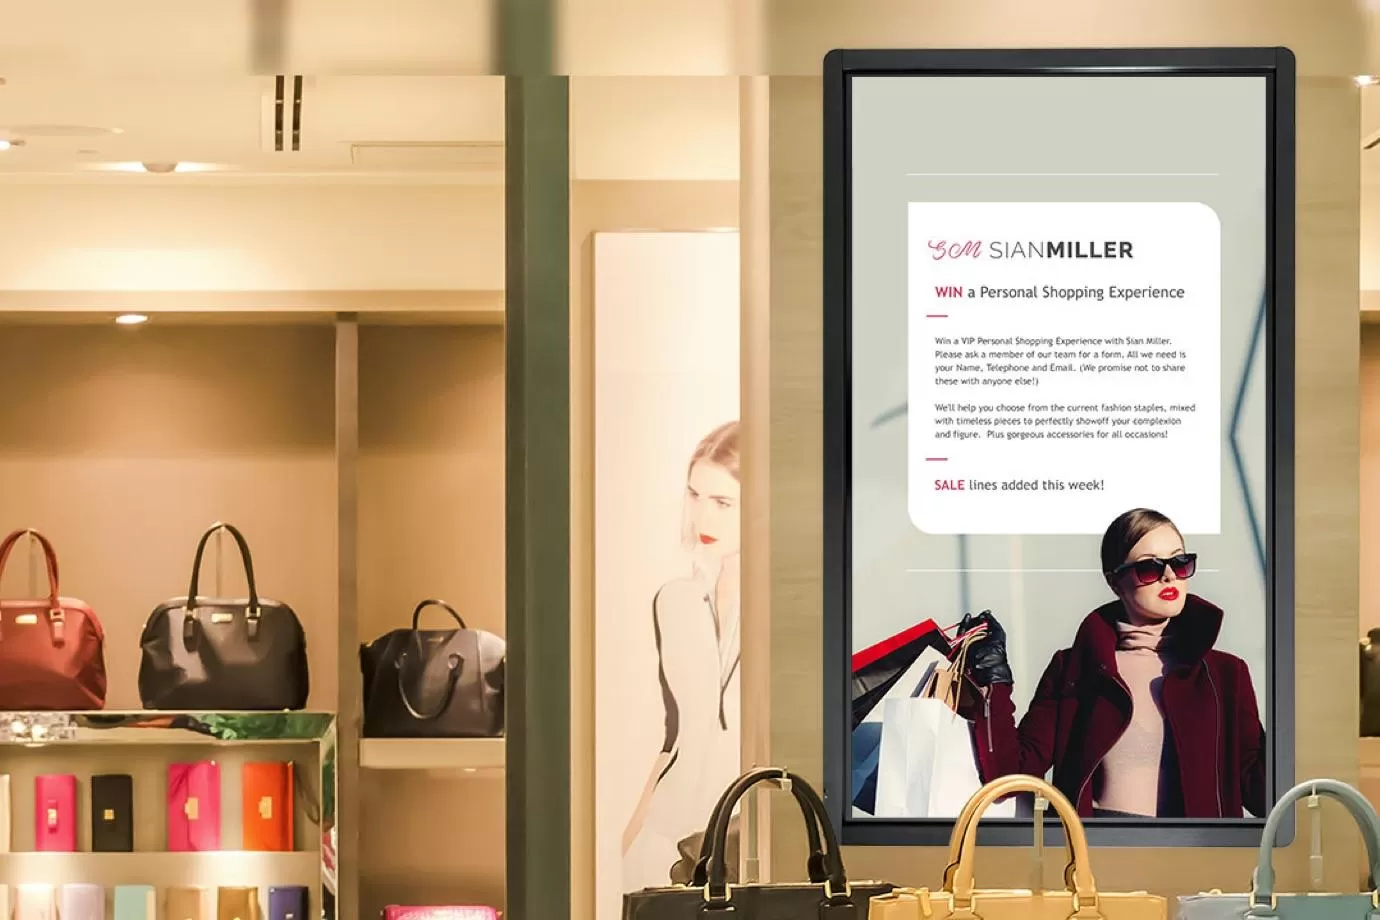 Clothes shop using digital signage to tell customers about a competition